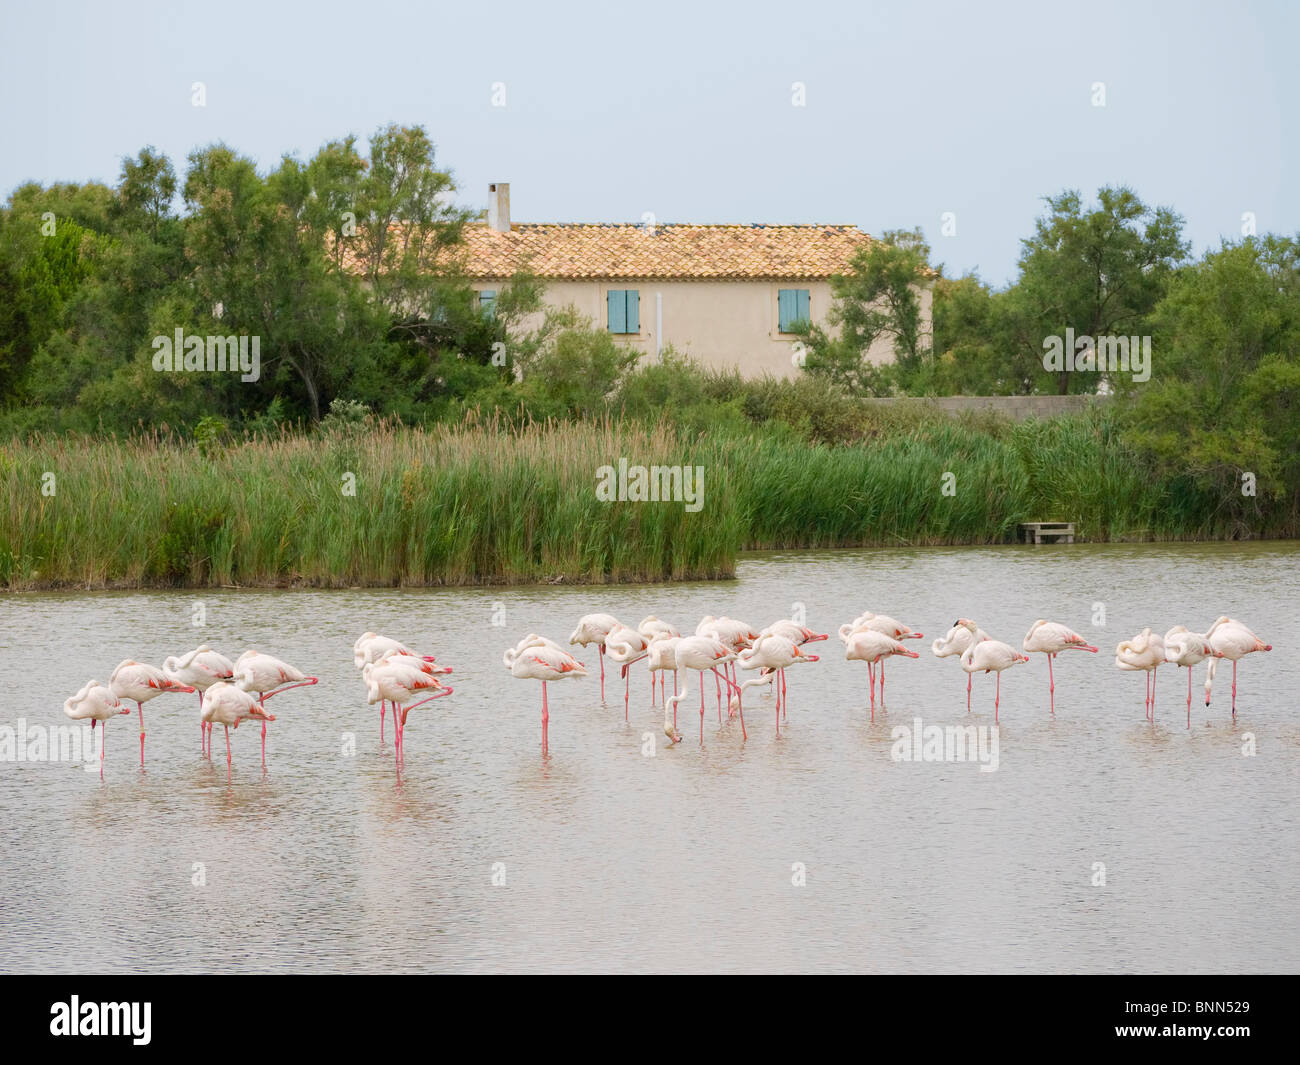 Flock of flamingoes at the bird reserve in the Camargue, South of France Stock Photo